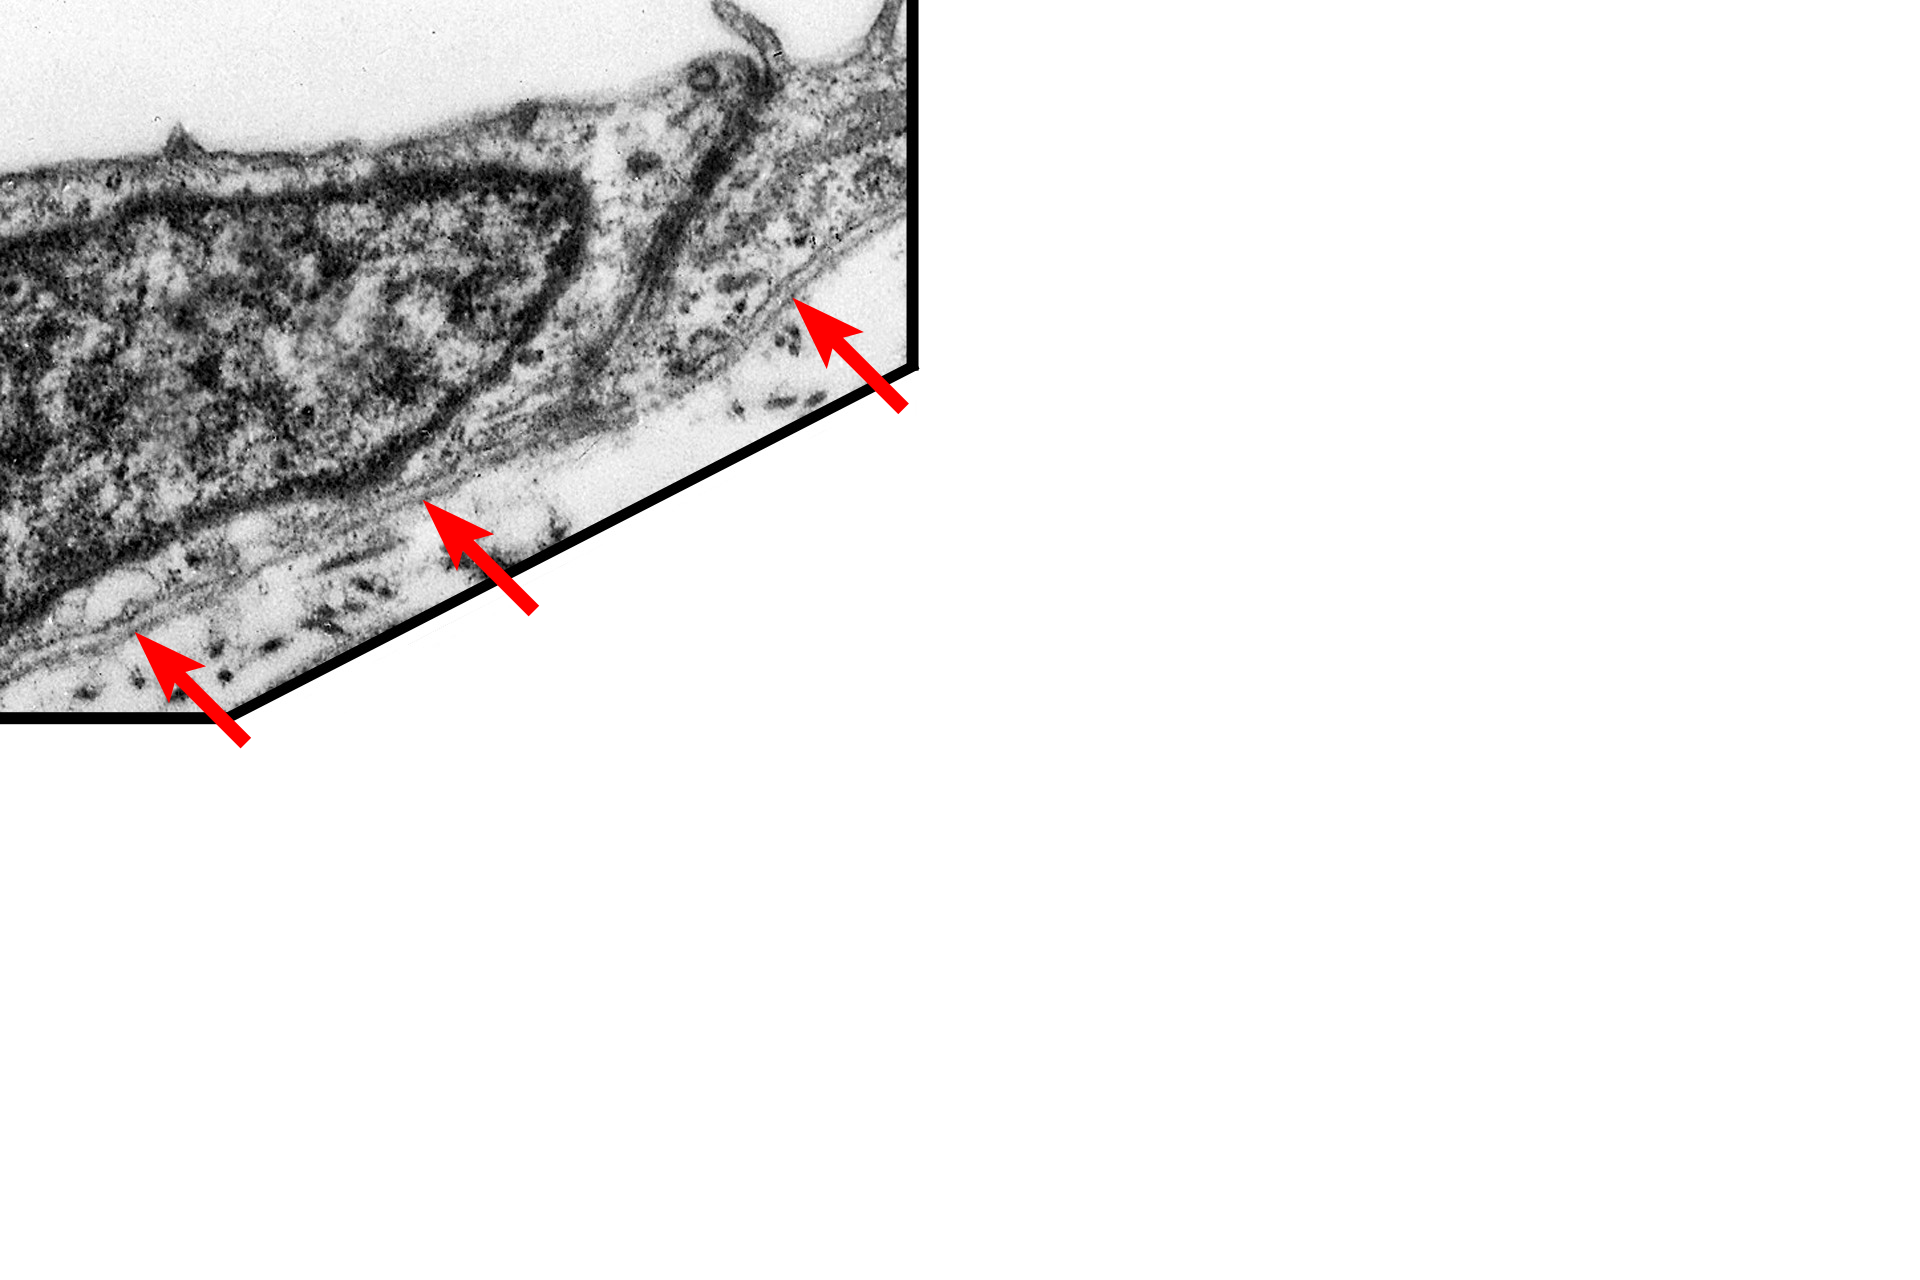 Lamina densa <p>All epithelia rest on a basement membrane, which consists of two components, the basal lamina, secreted by epithelial cells, and a reticular lamina, secreted by fibroblasts in the underlying connective tissue.  The basal lamina is, in turn, subdivided into lamina lucida and lamina densa.  Serosa  15,000x</p>
